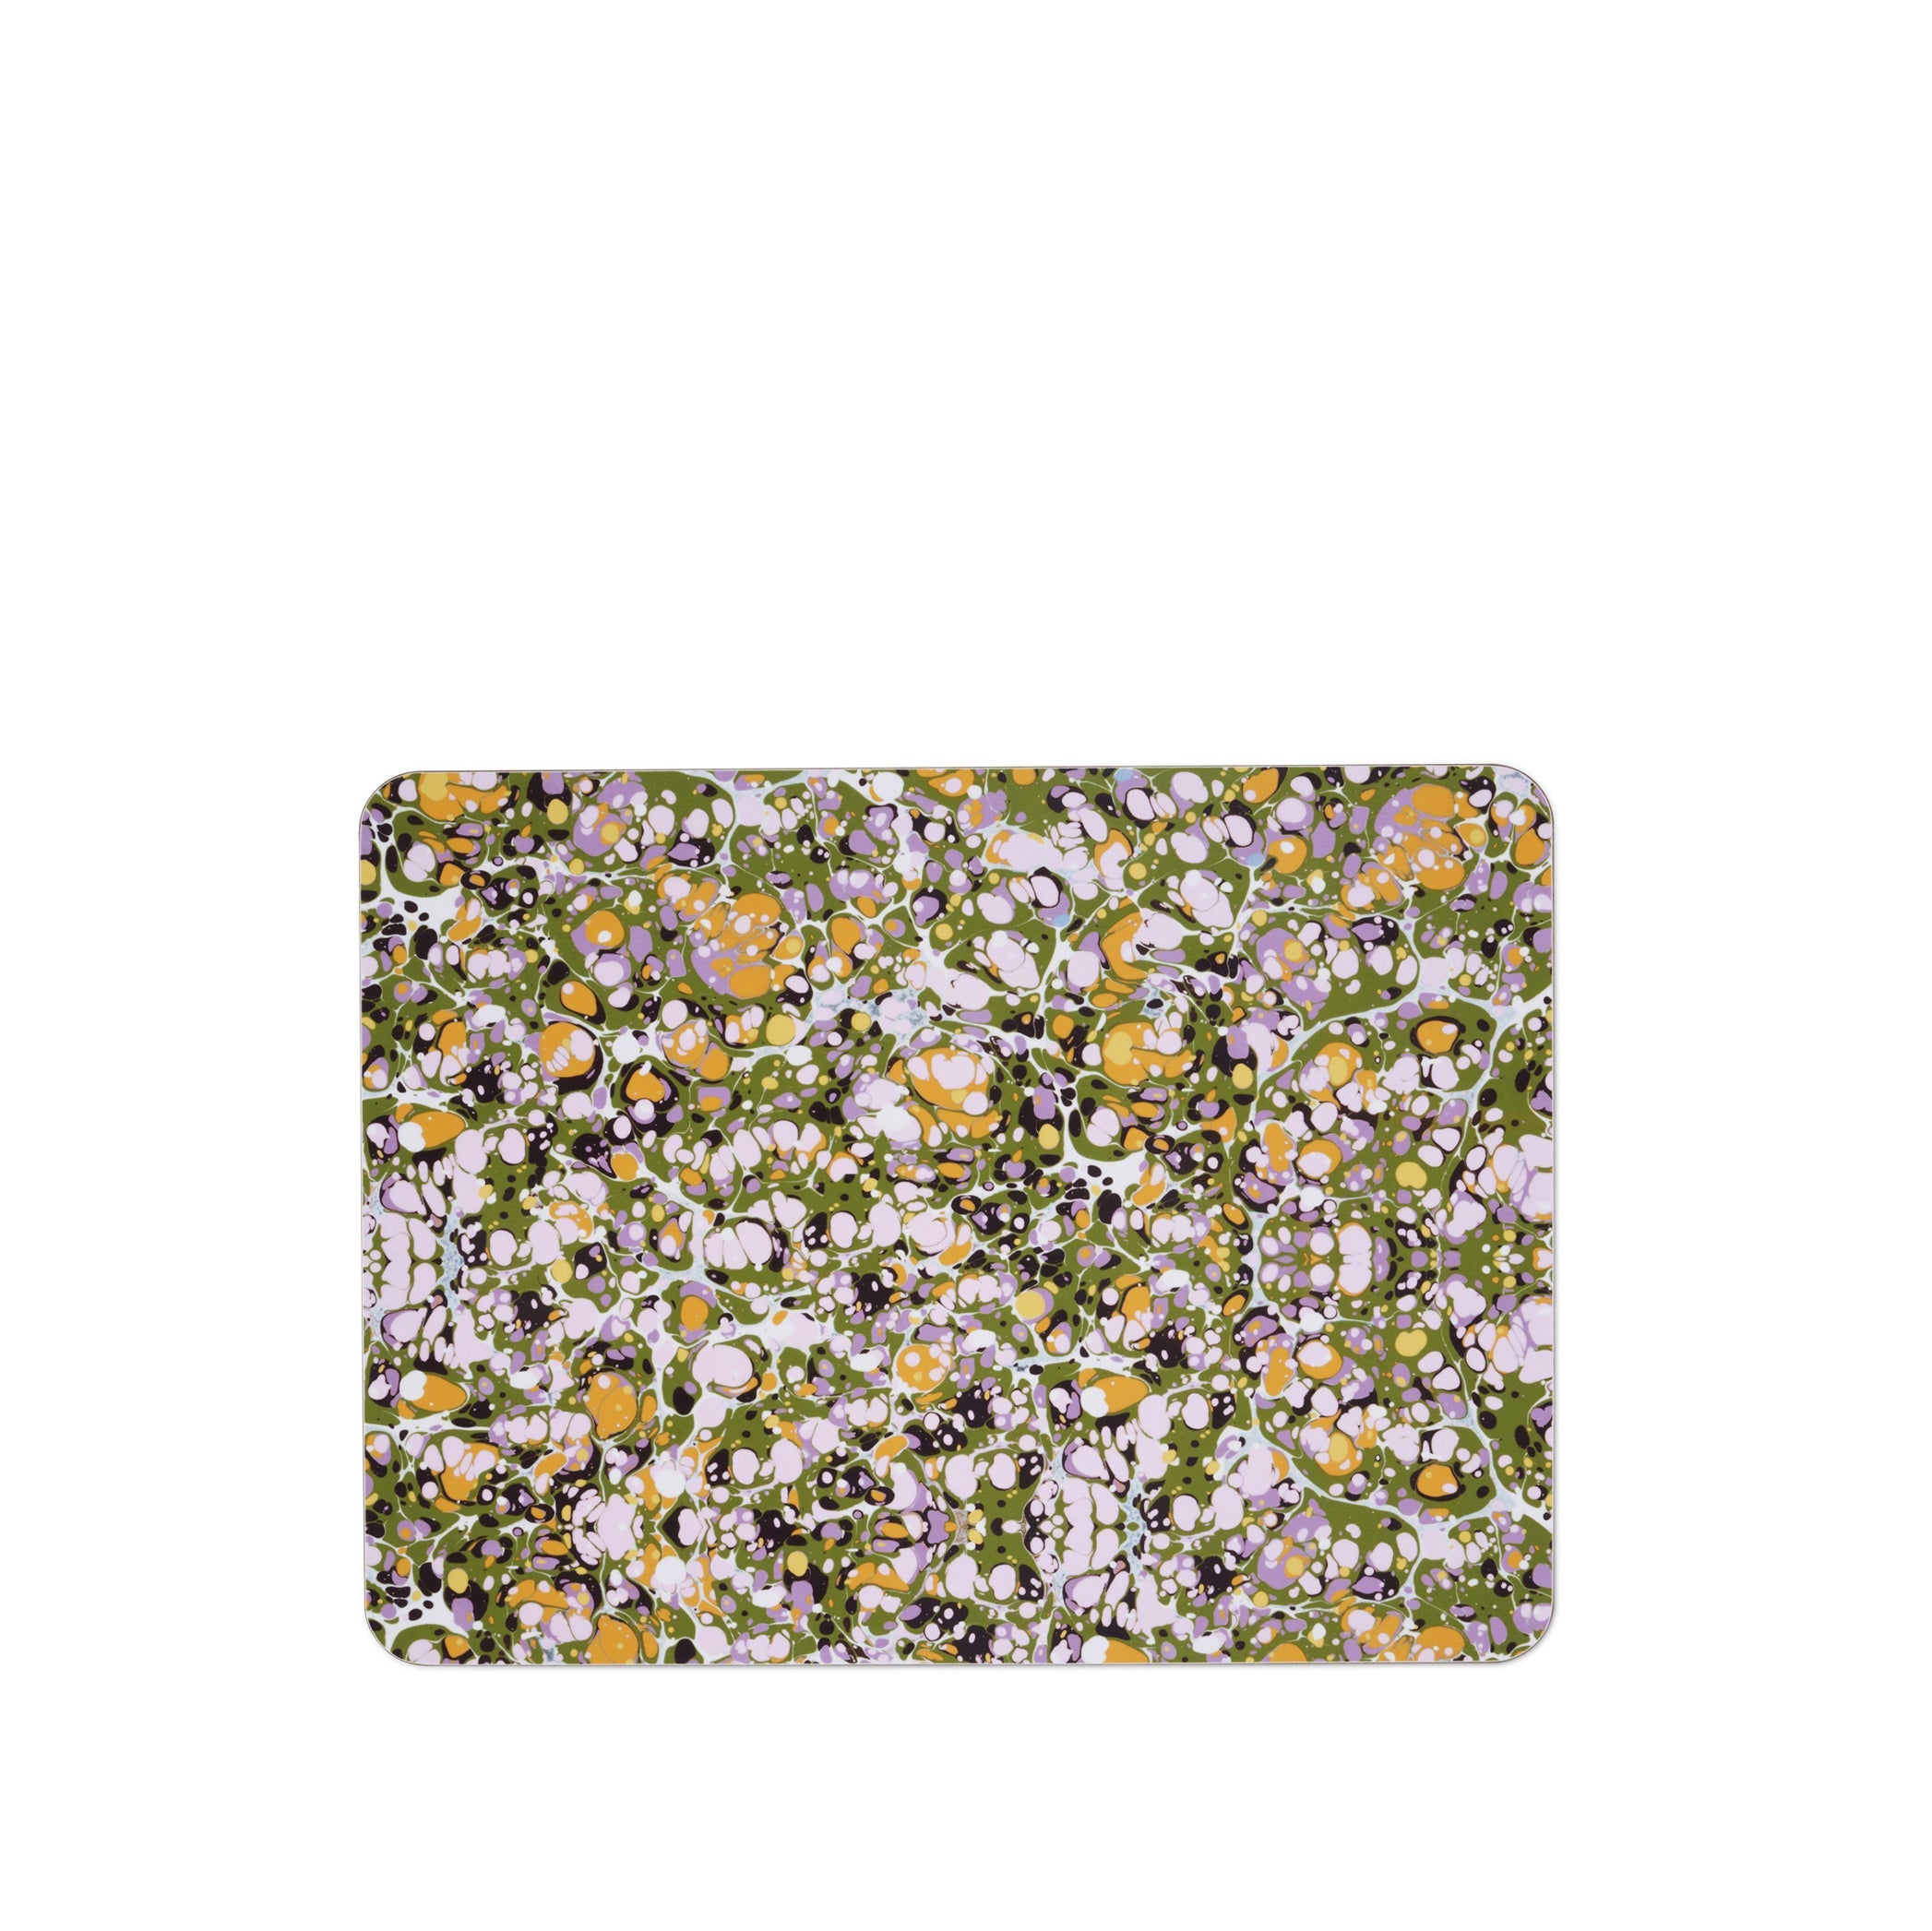 S&B Marble Cork-Backed Placemat in Green, Rose Pink & Orange